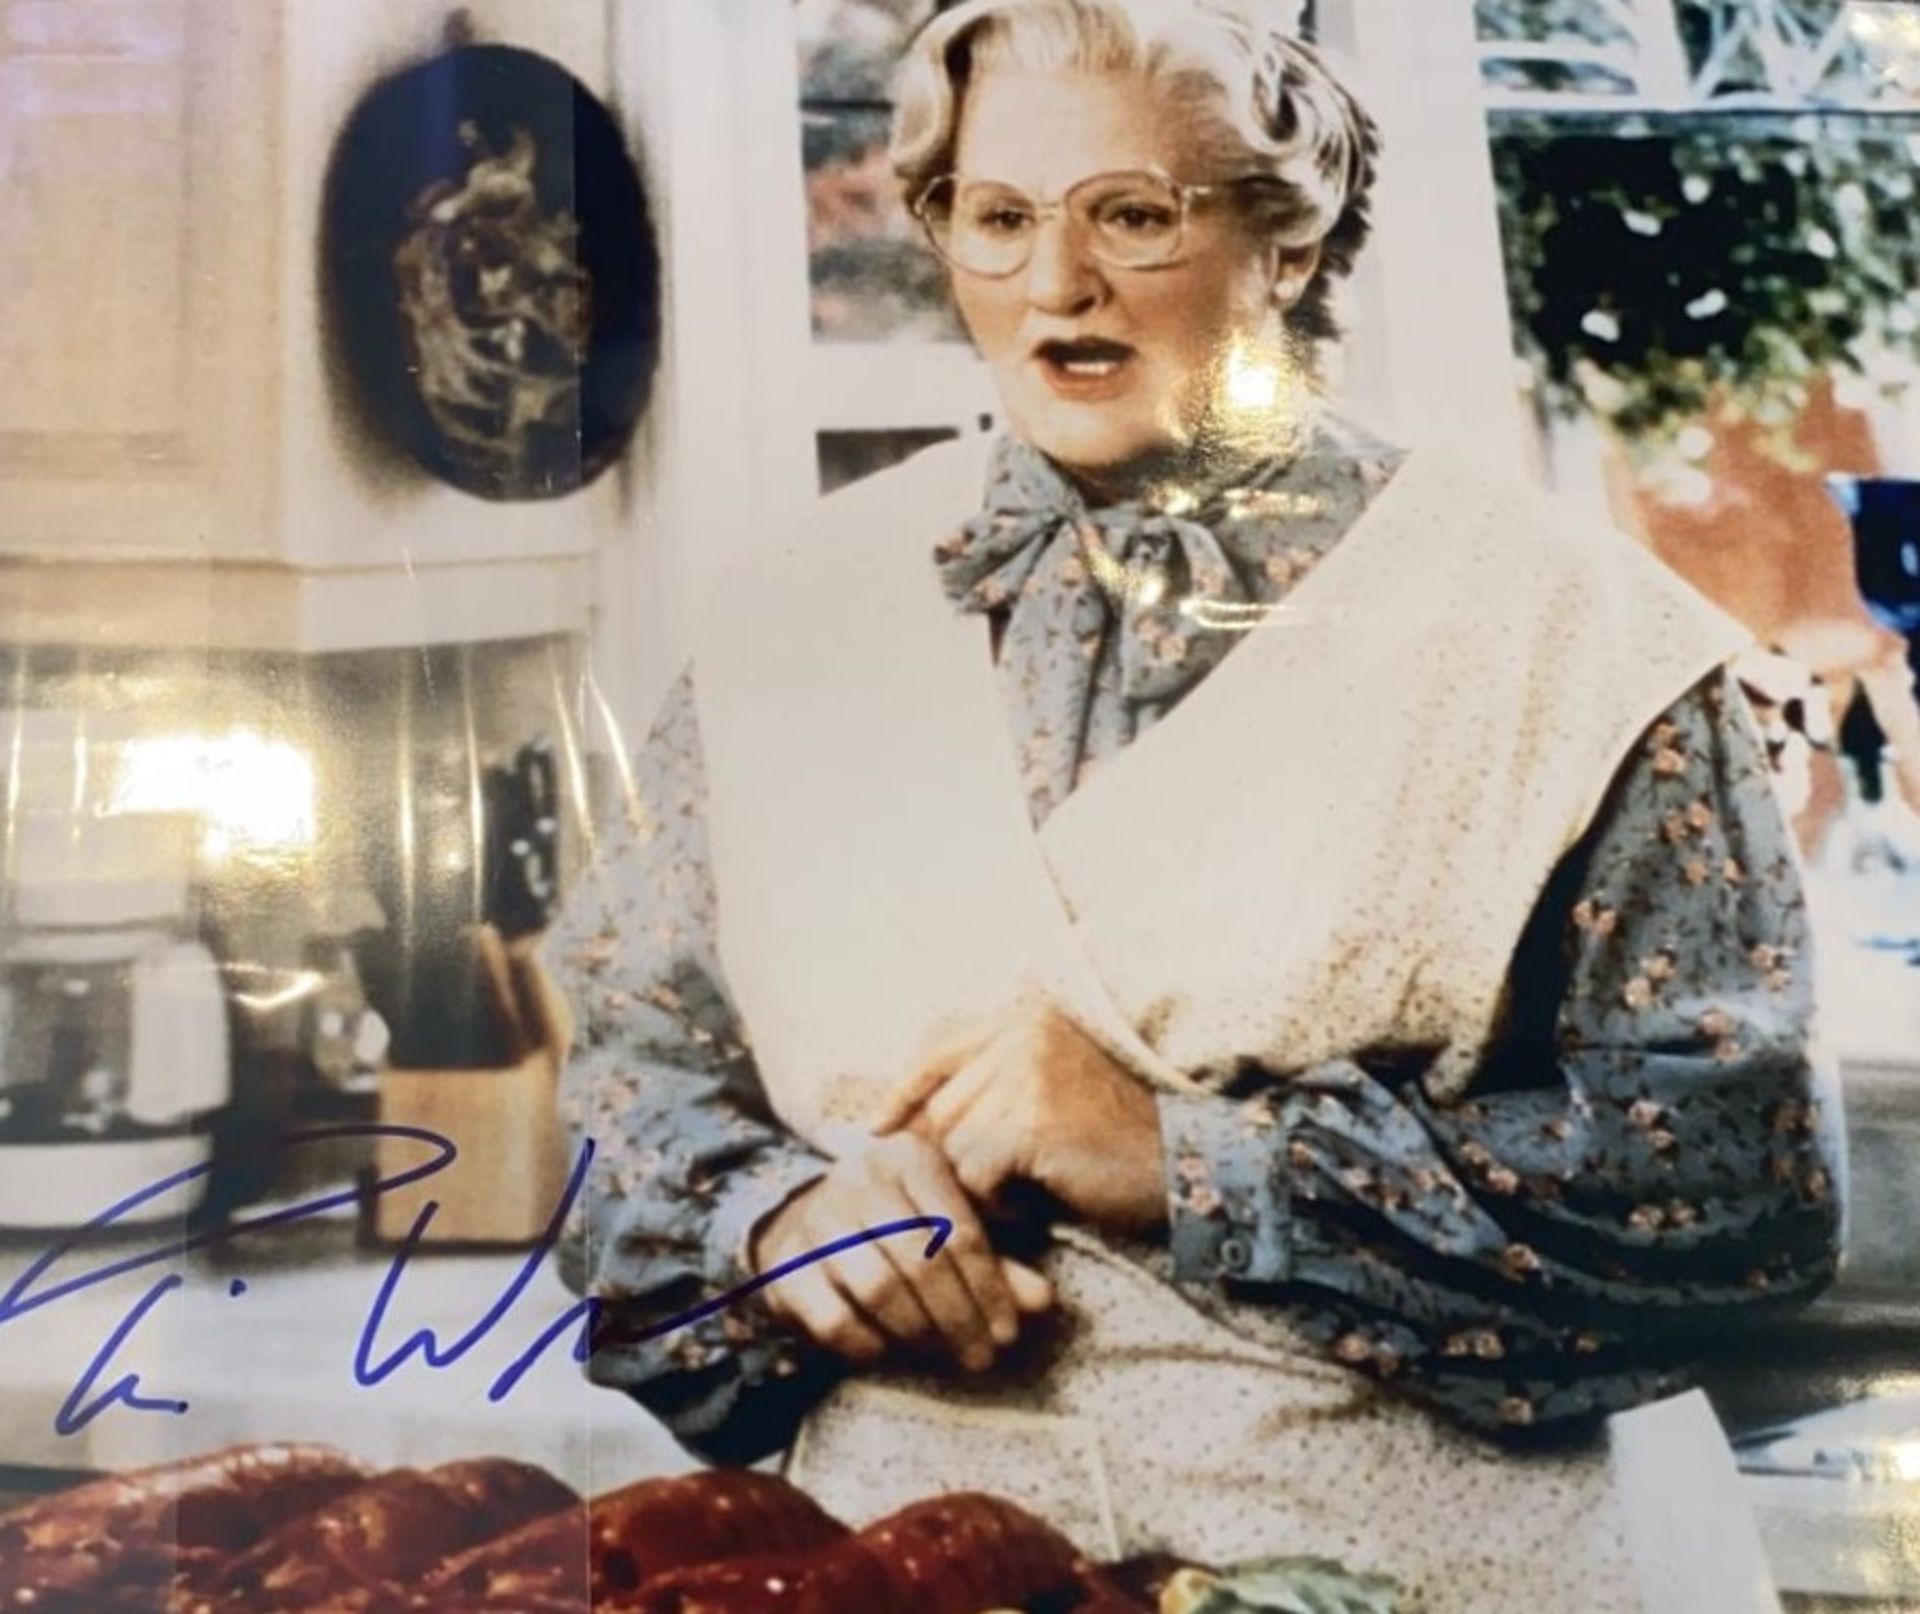 1 x Signed Autograph Picture - ROBIN WILLIAMS MRS DOUBTFIRE - With COA - Size 12 x 8 Inch - NO VAT